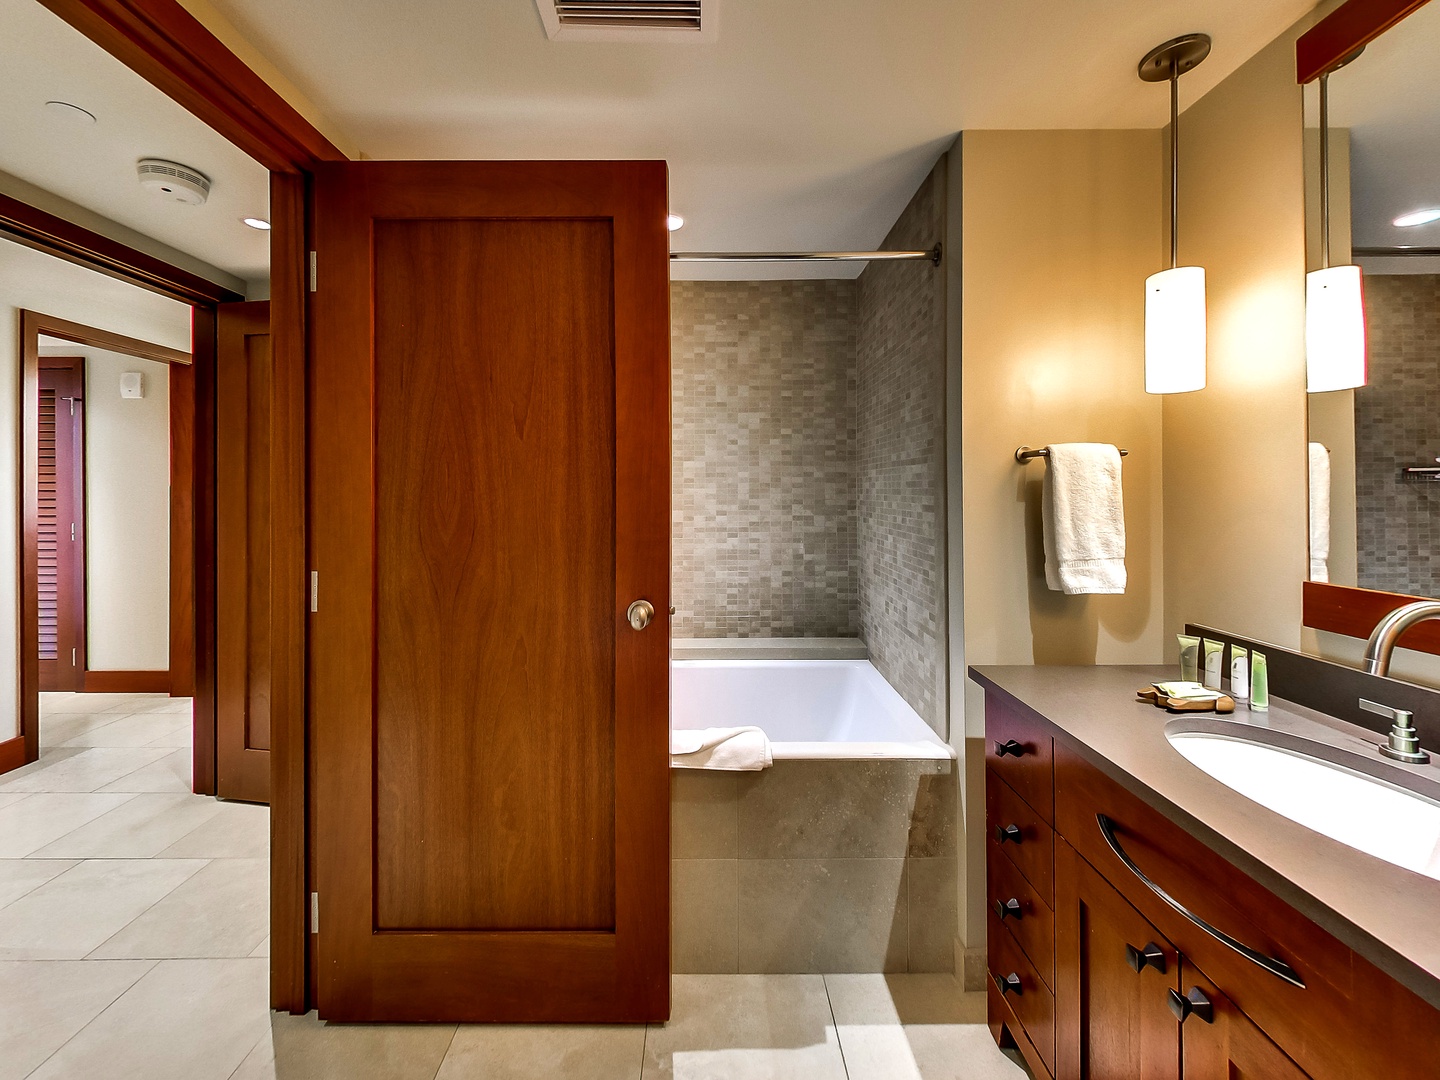 Kapolei Vacation Rentals, Ko Olina Beach Villas O1011 - The third guest bathroom with a soaking tub to rest and renew.